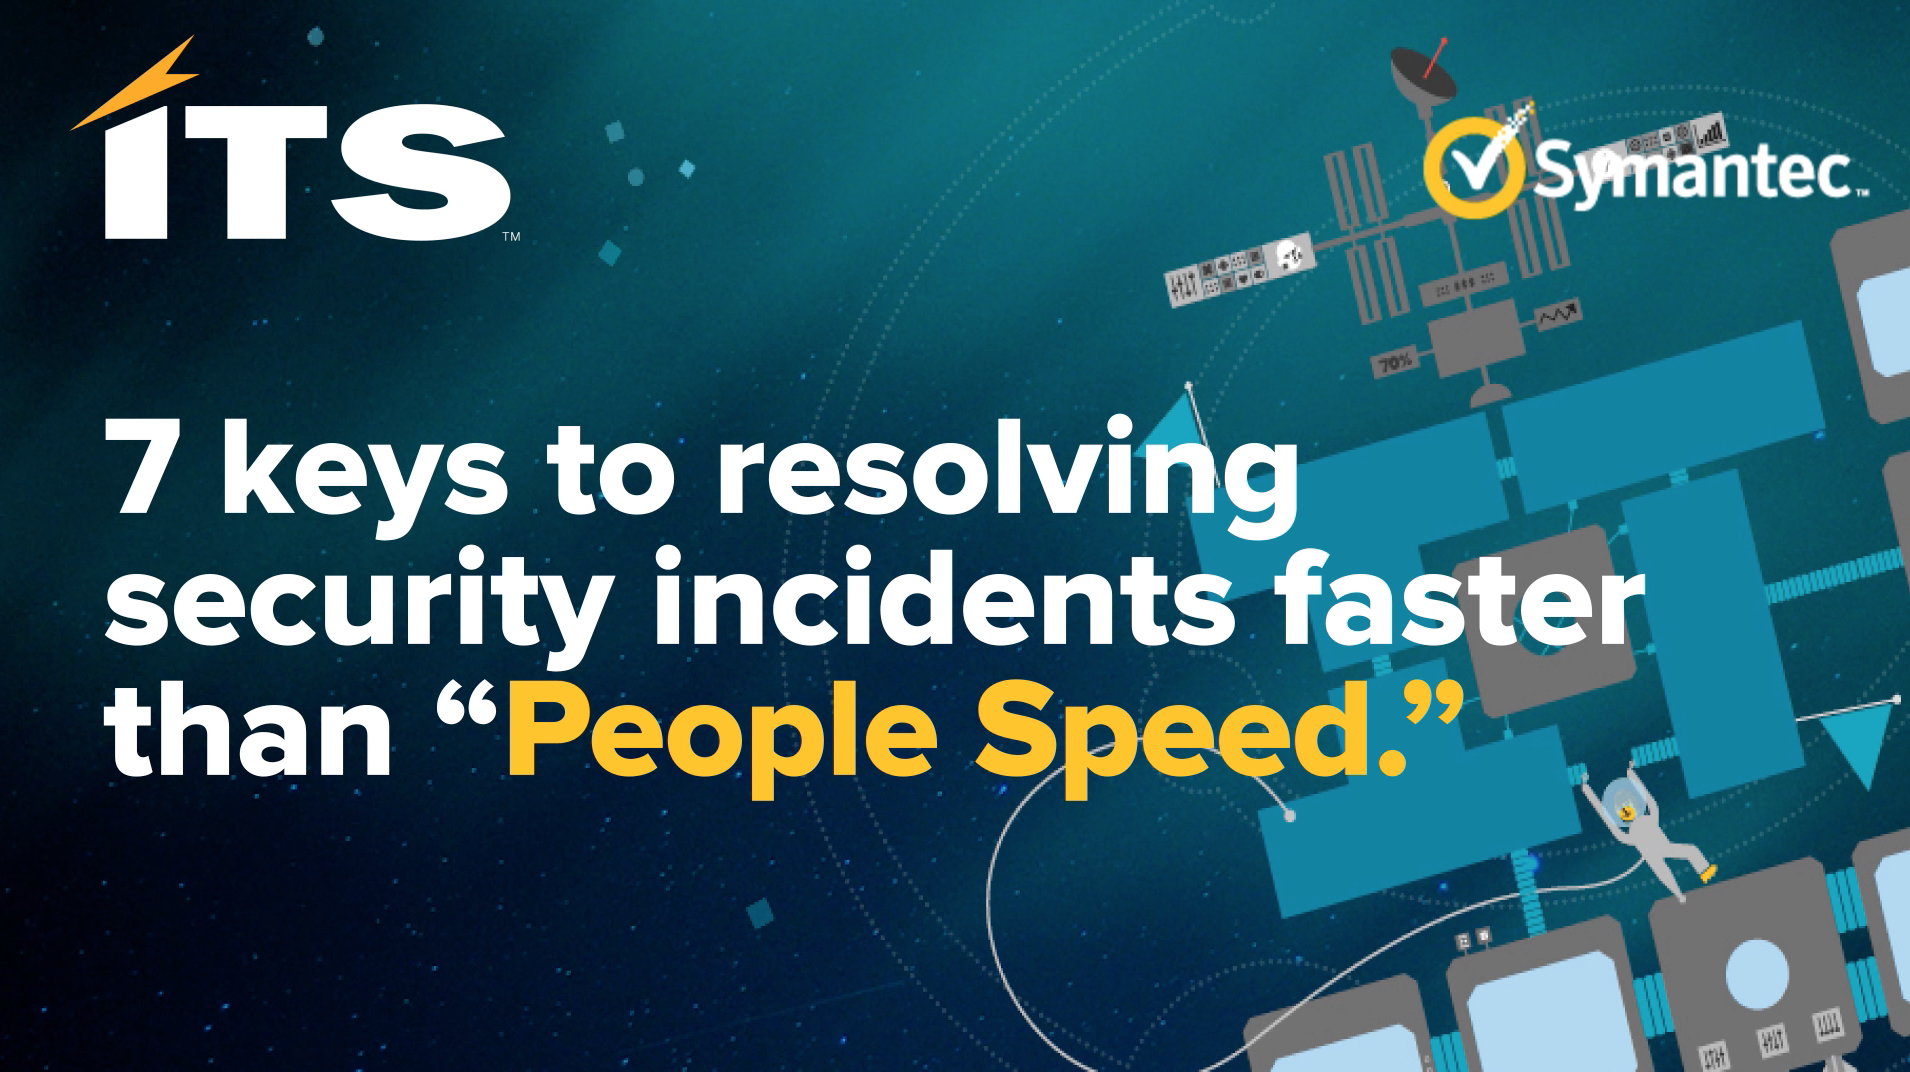 7 keys to resolving security incidents faster than “People Speed Recording